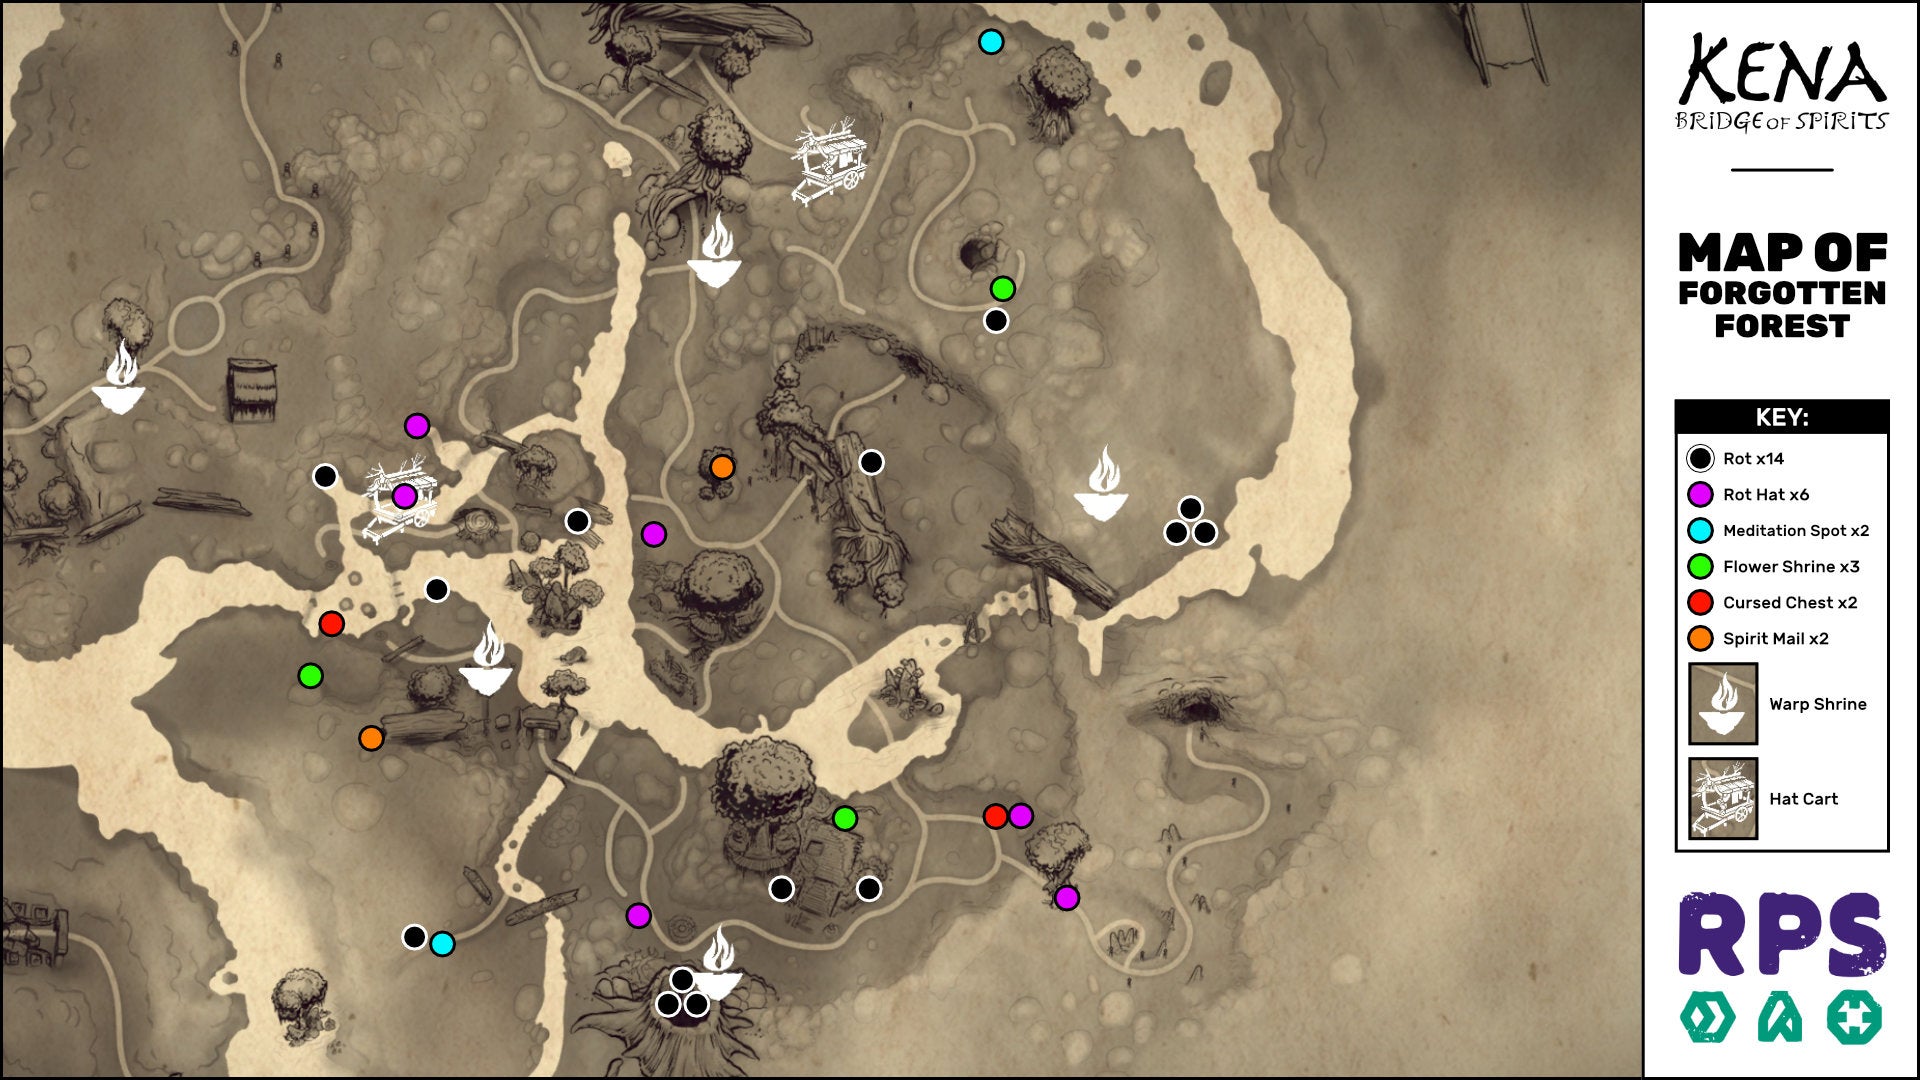 A map of the Forgotten Forest area of Kena: Bridge Of Spirits with all collectible locations marked.